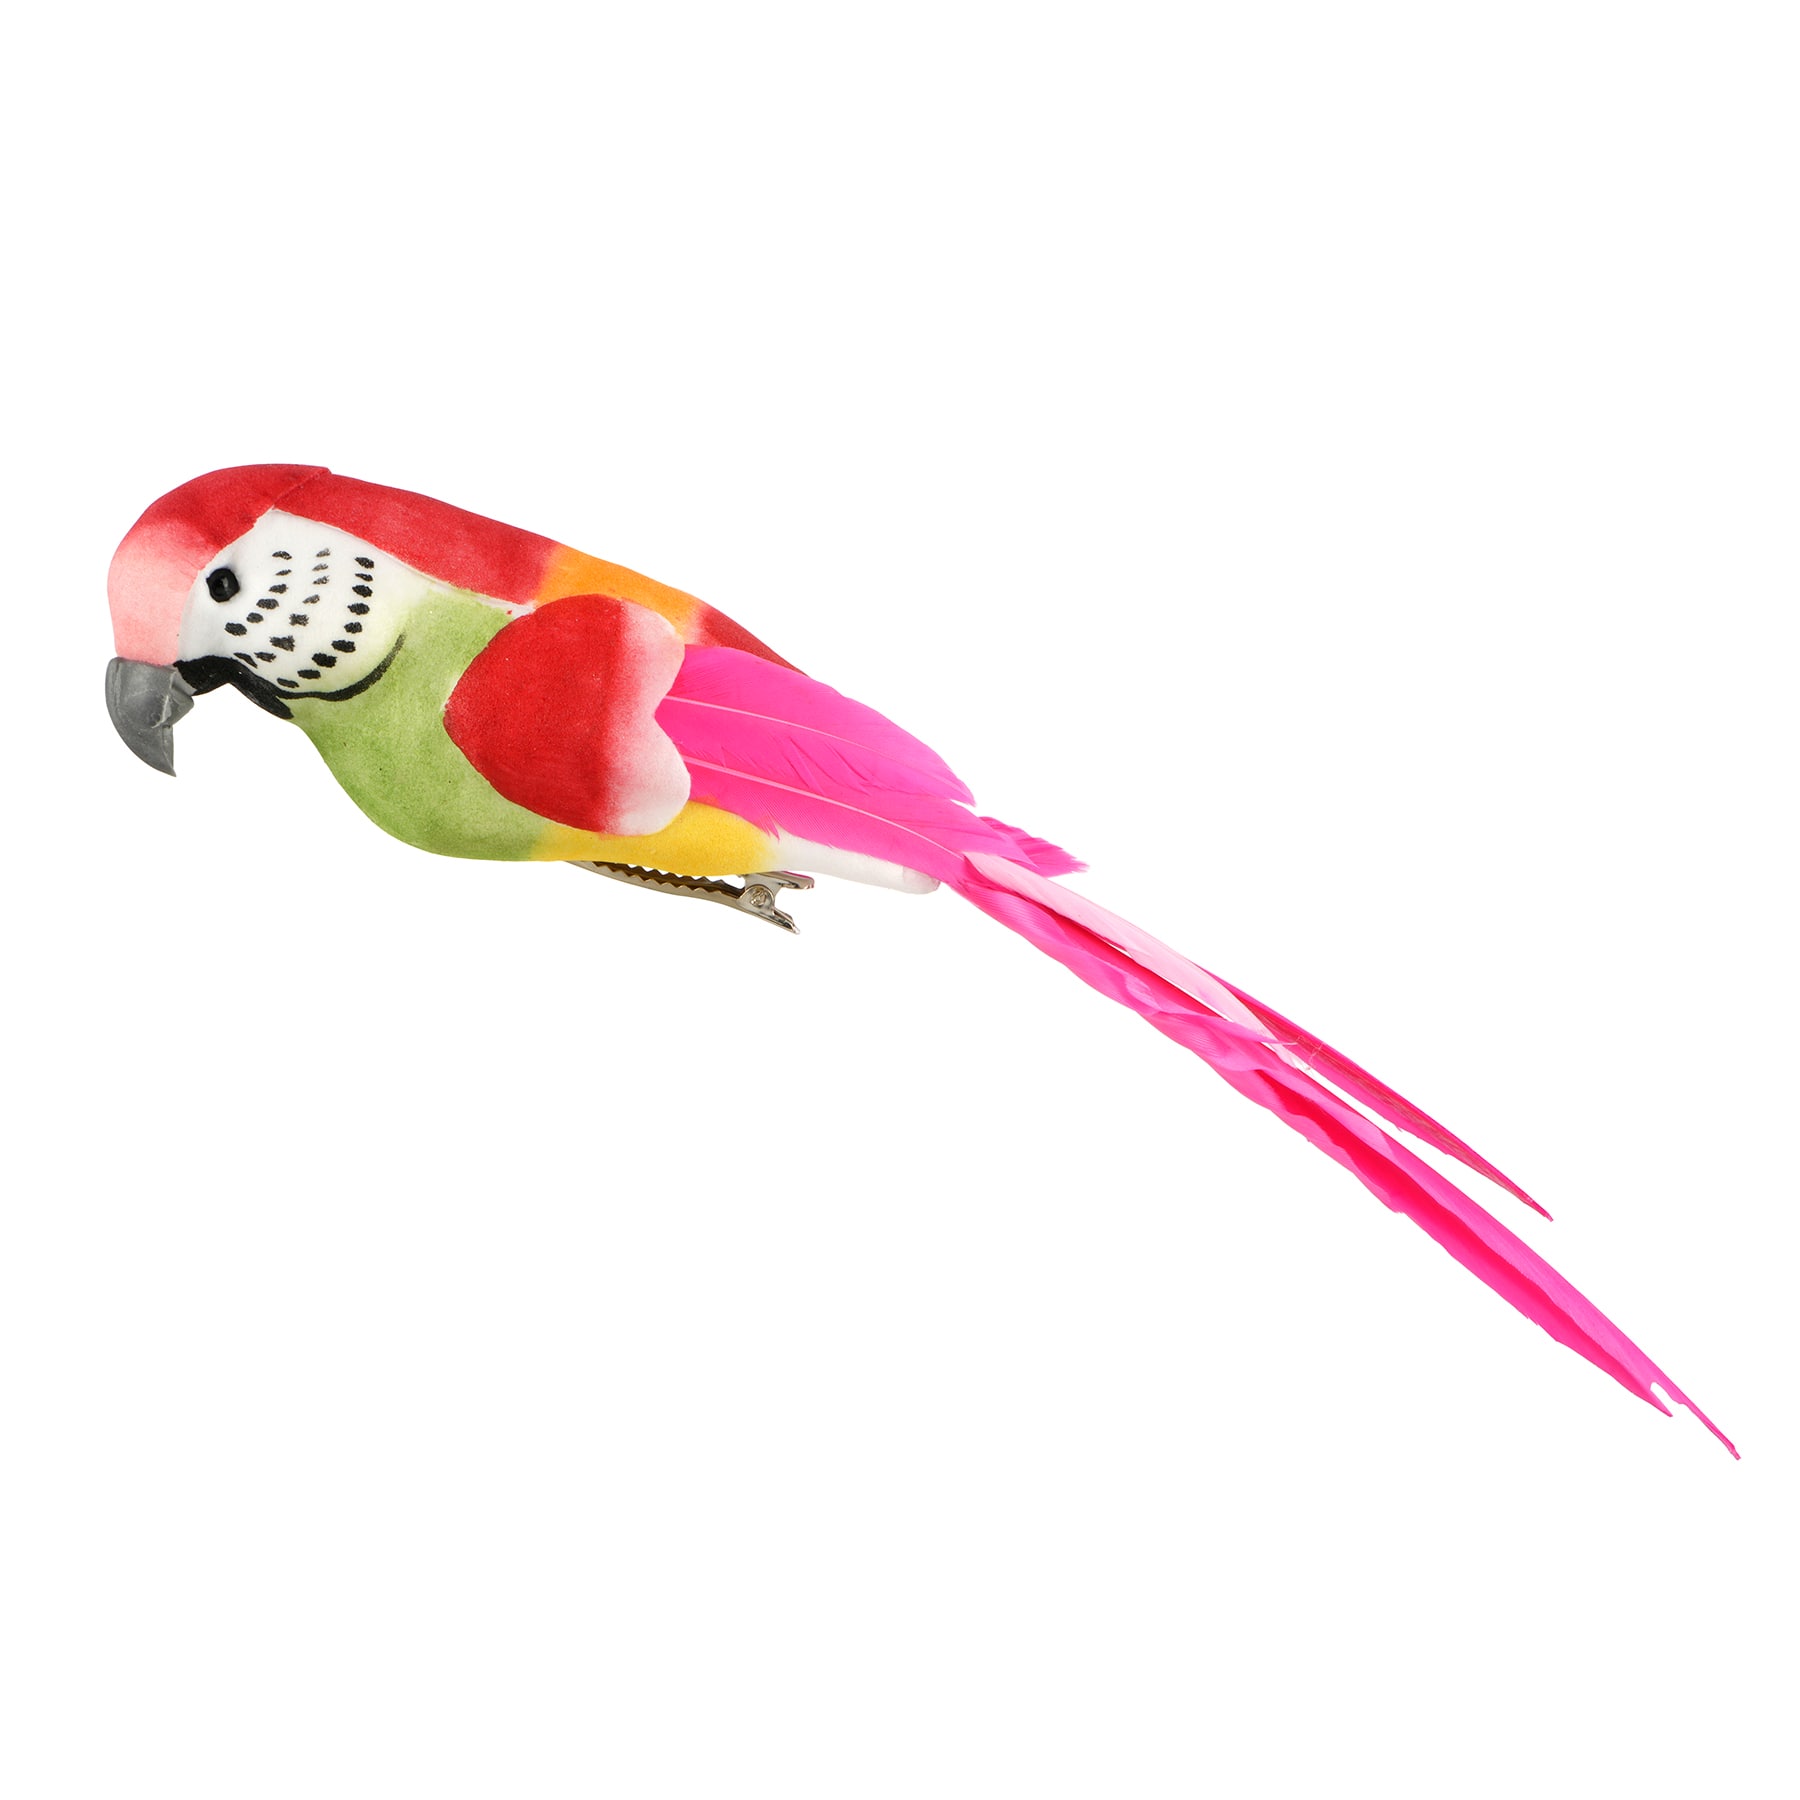 Pink Parrot by Ashland&#xAE;